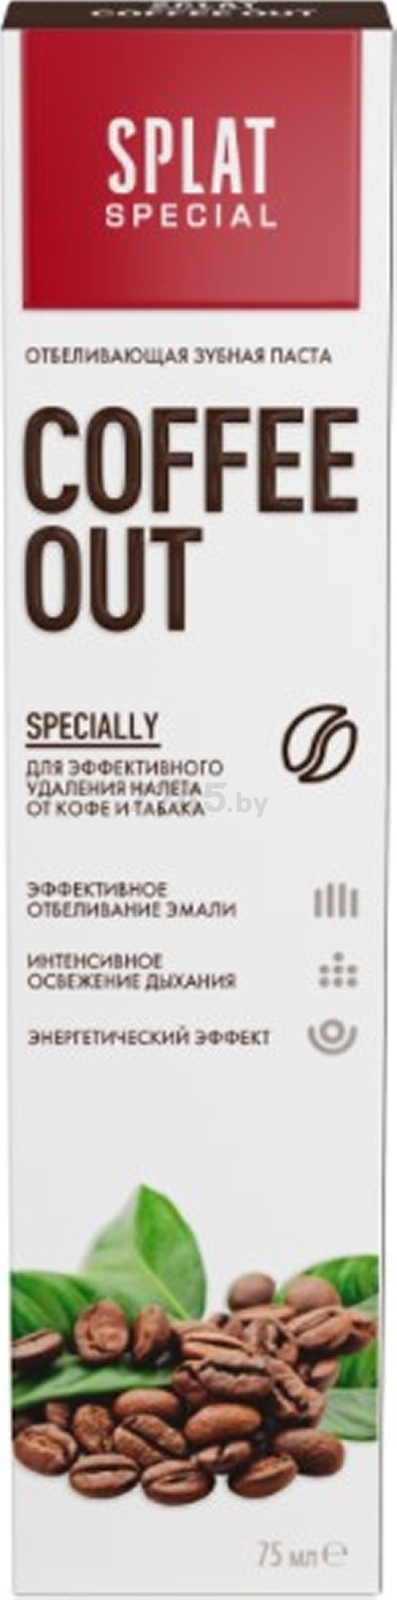 Зубная паста SPLAT Special Coffee Out 75 мл (4603014010650) - Фото 3